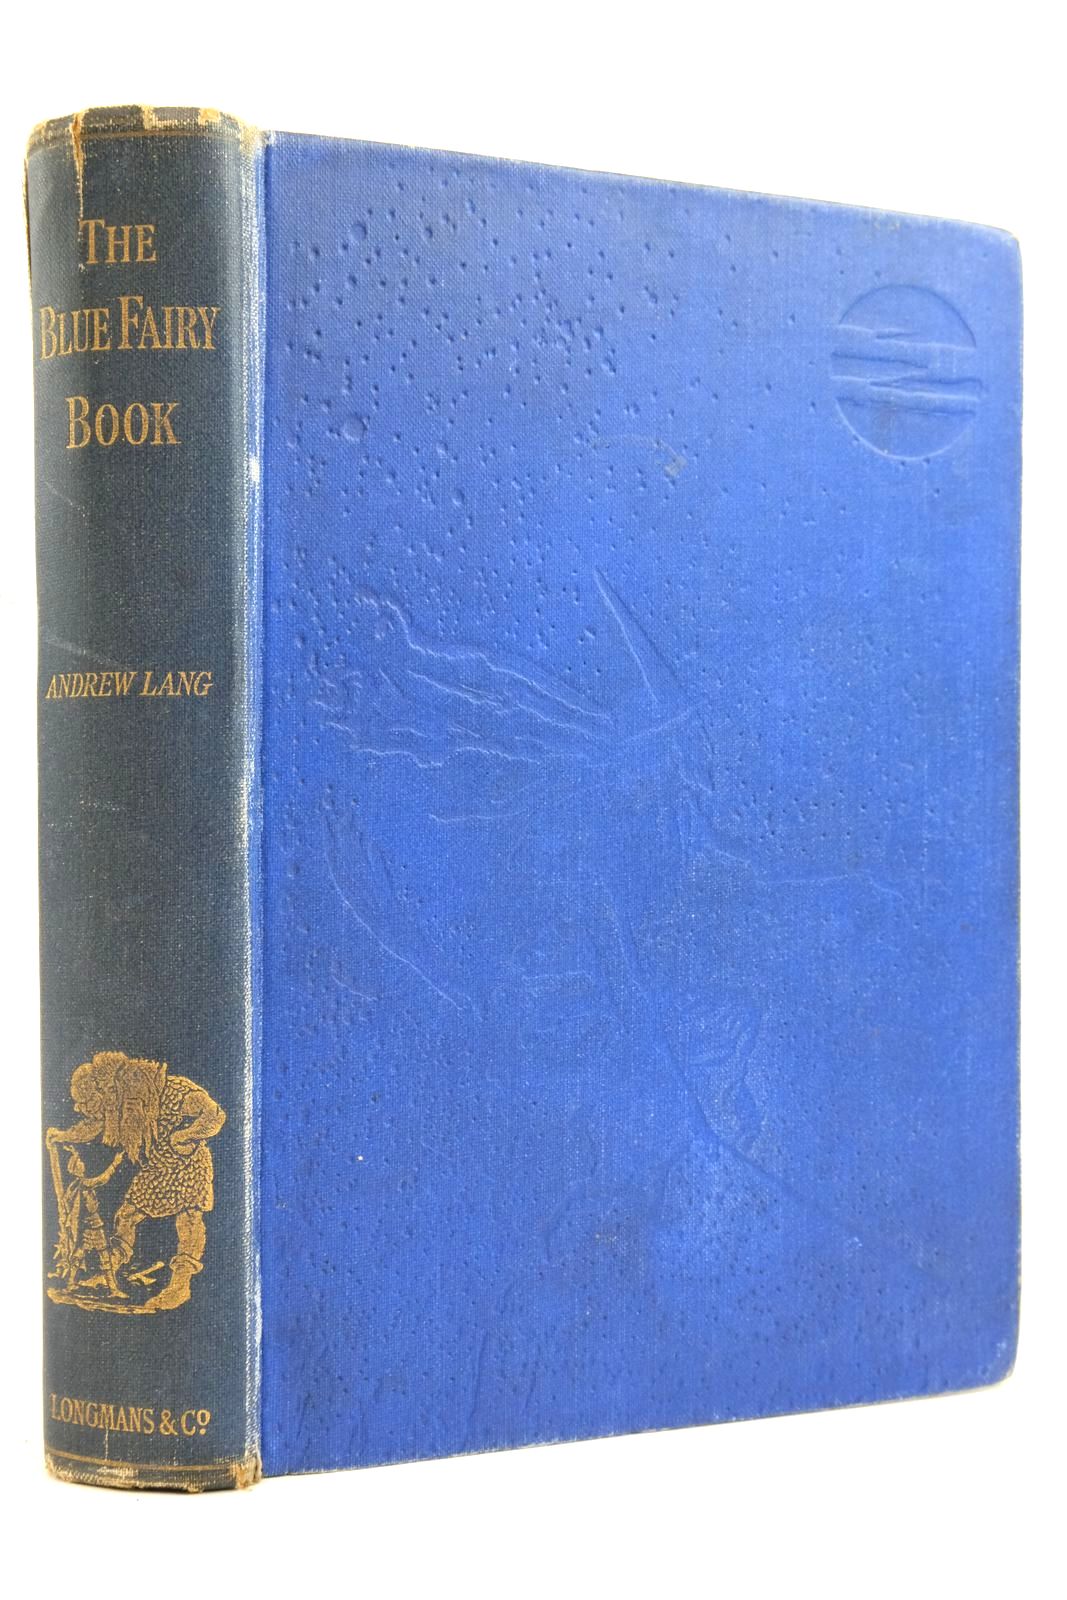 Photo of THE BLUE FAIRY BOOK- Stock Number: 2135880